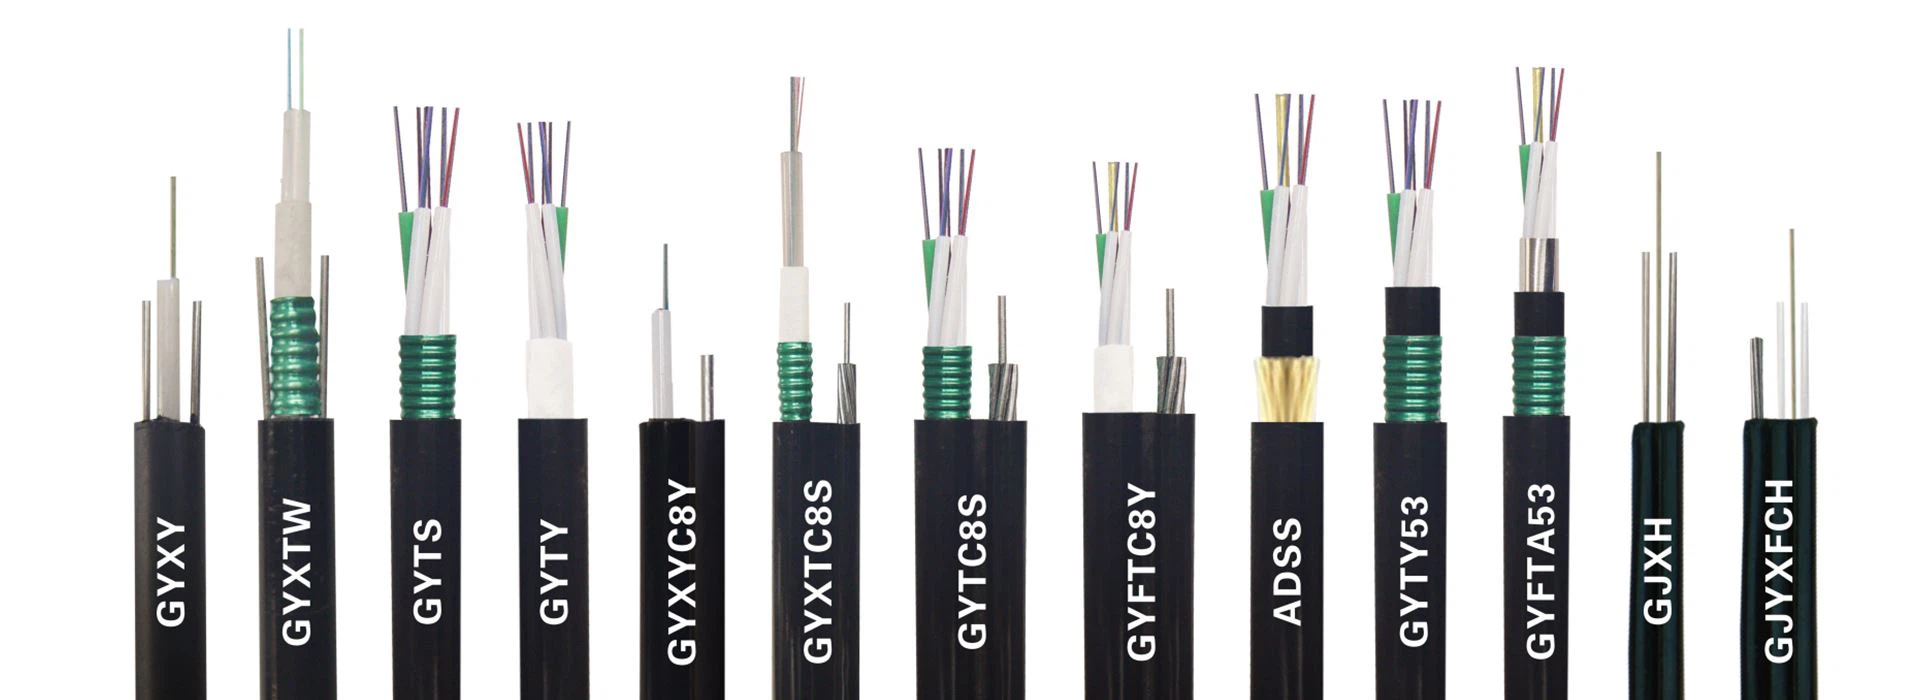 GYXTC8S Center Tube Figure 8 Self-supporting Optical cable